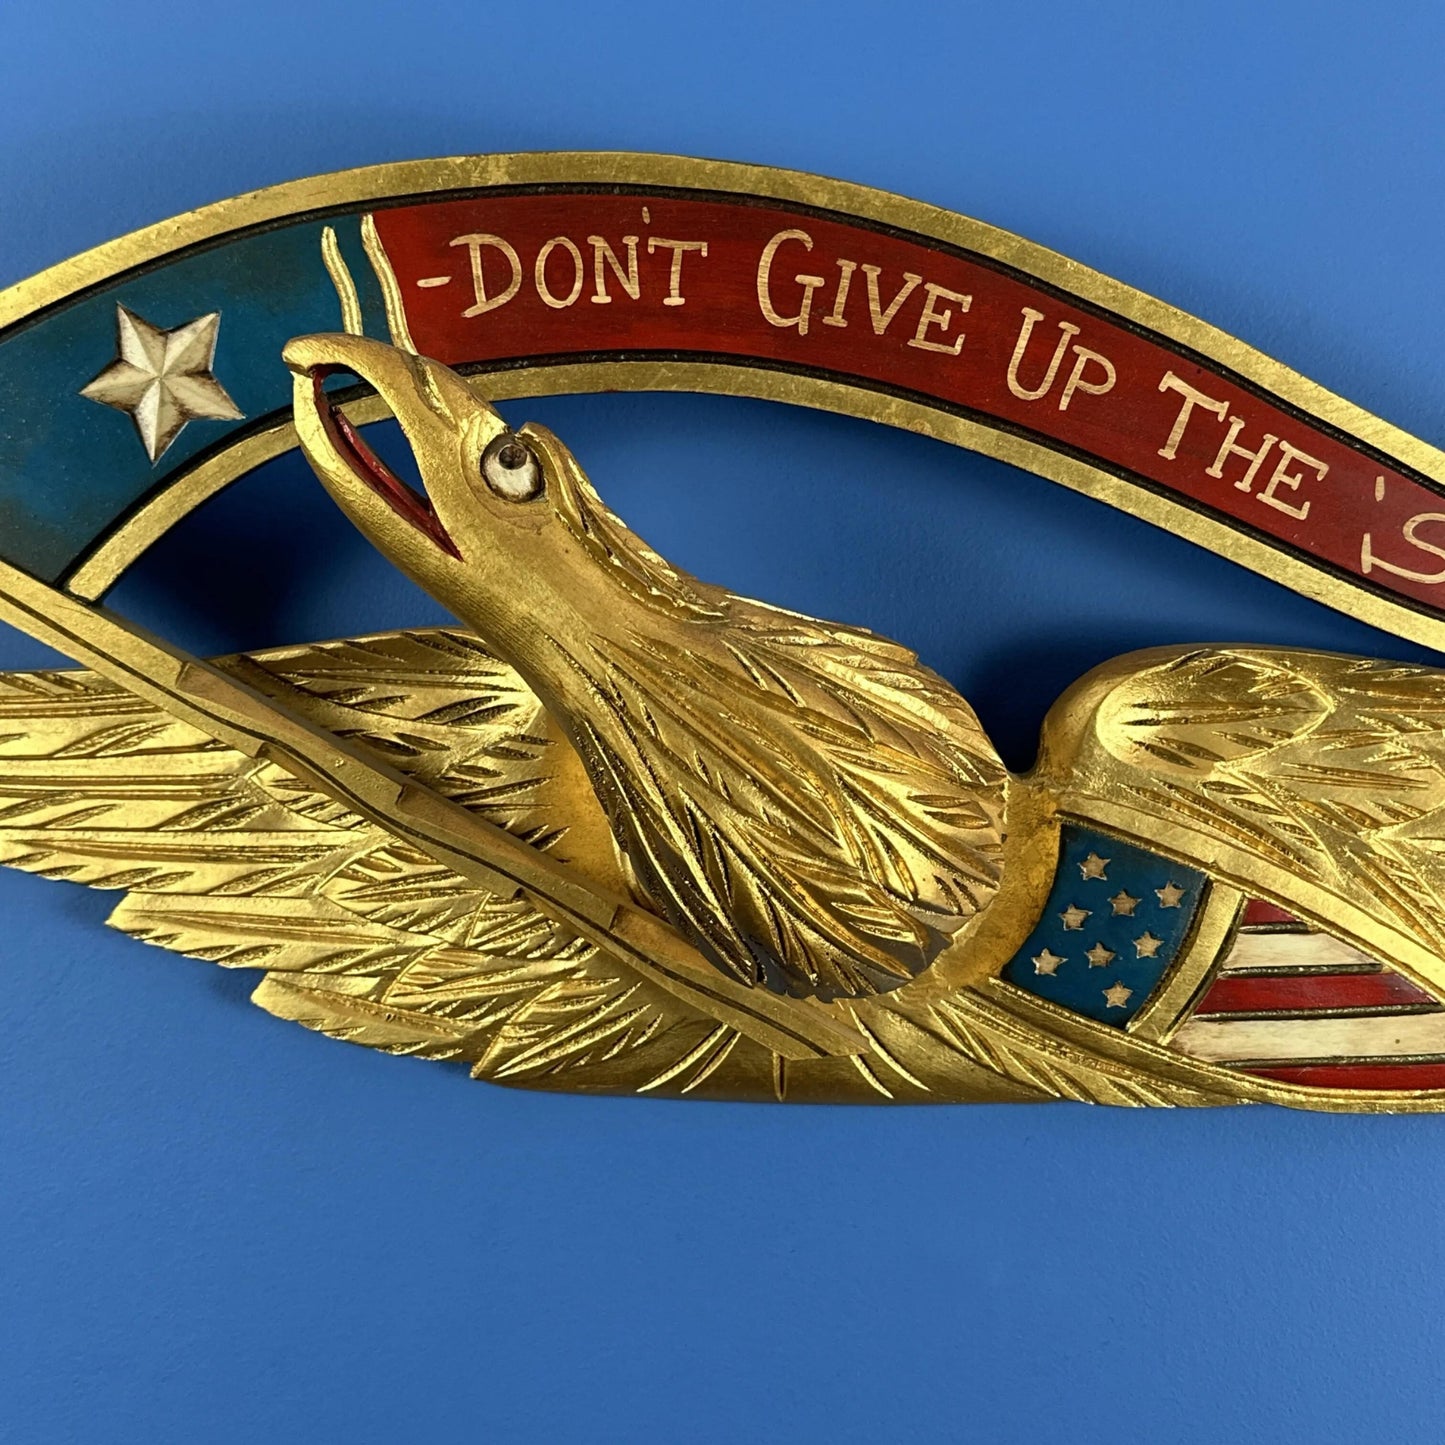 Carved wooden eagle — "Don't give up the ship" — 28" wide